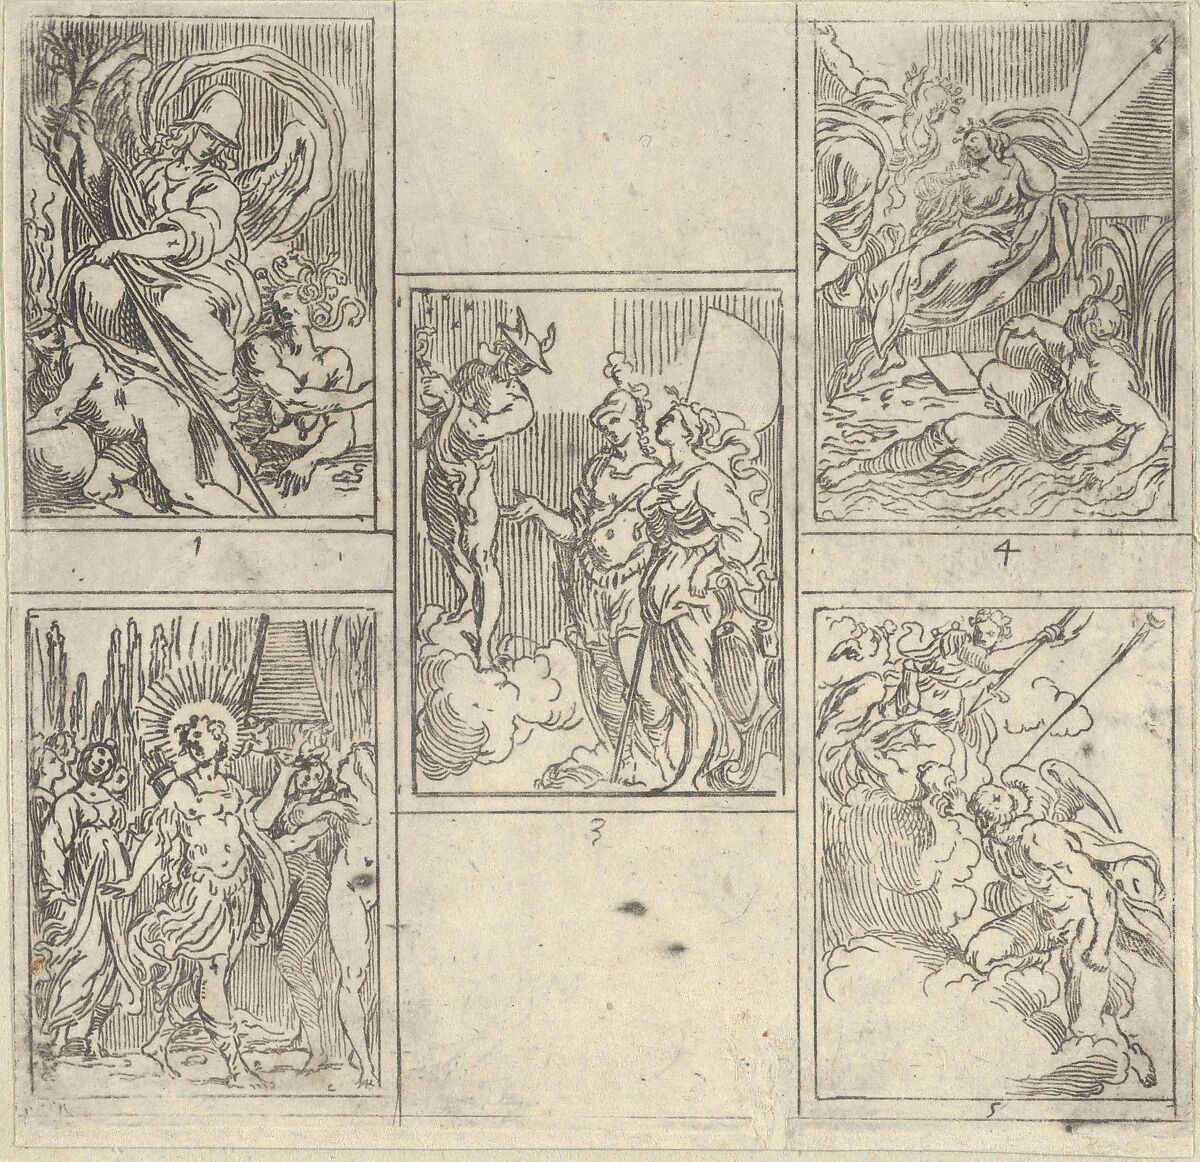 Five numbered scenes, each after a painter in the Accademia Degl'Incamminati, from IL FUNERALE D'AGOSTINO CARRACCIO FATTO IN BOLOGNA SUA PATRIA DAGL'INCAMINATI Academici del Disegno: 1. Virtue vanquishing Envy and Fortune, painted by Giulio Cesare Parigino; 2. Apollo and the Muses at the tomb of Agostino Carracci, painted by Luigi Valesio; 3. Mercury pointing to a constellation with the personification of Painting and that of the city of Bologna, Felsina, painted by Aurelio Benelli; 4. Personification of Painting being comforted by Poetry, and the personification of a river at right, painted by Lodovico Carracci; 5. Allegory of Knowledge and Vigilance chasing Envy out of Heaven, painted by Lorenzo Garbieri., Guido Reni (Italian, Bologna 1575–1642 Bologna), Etching 